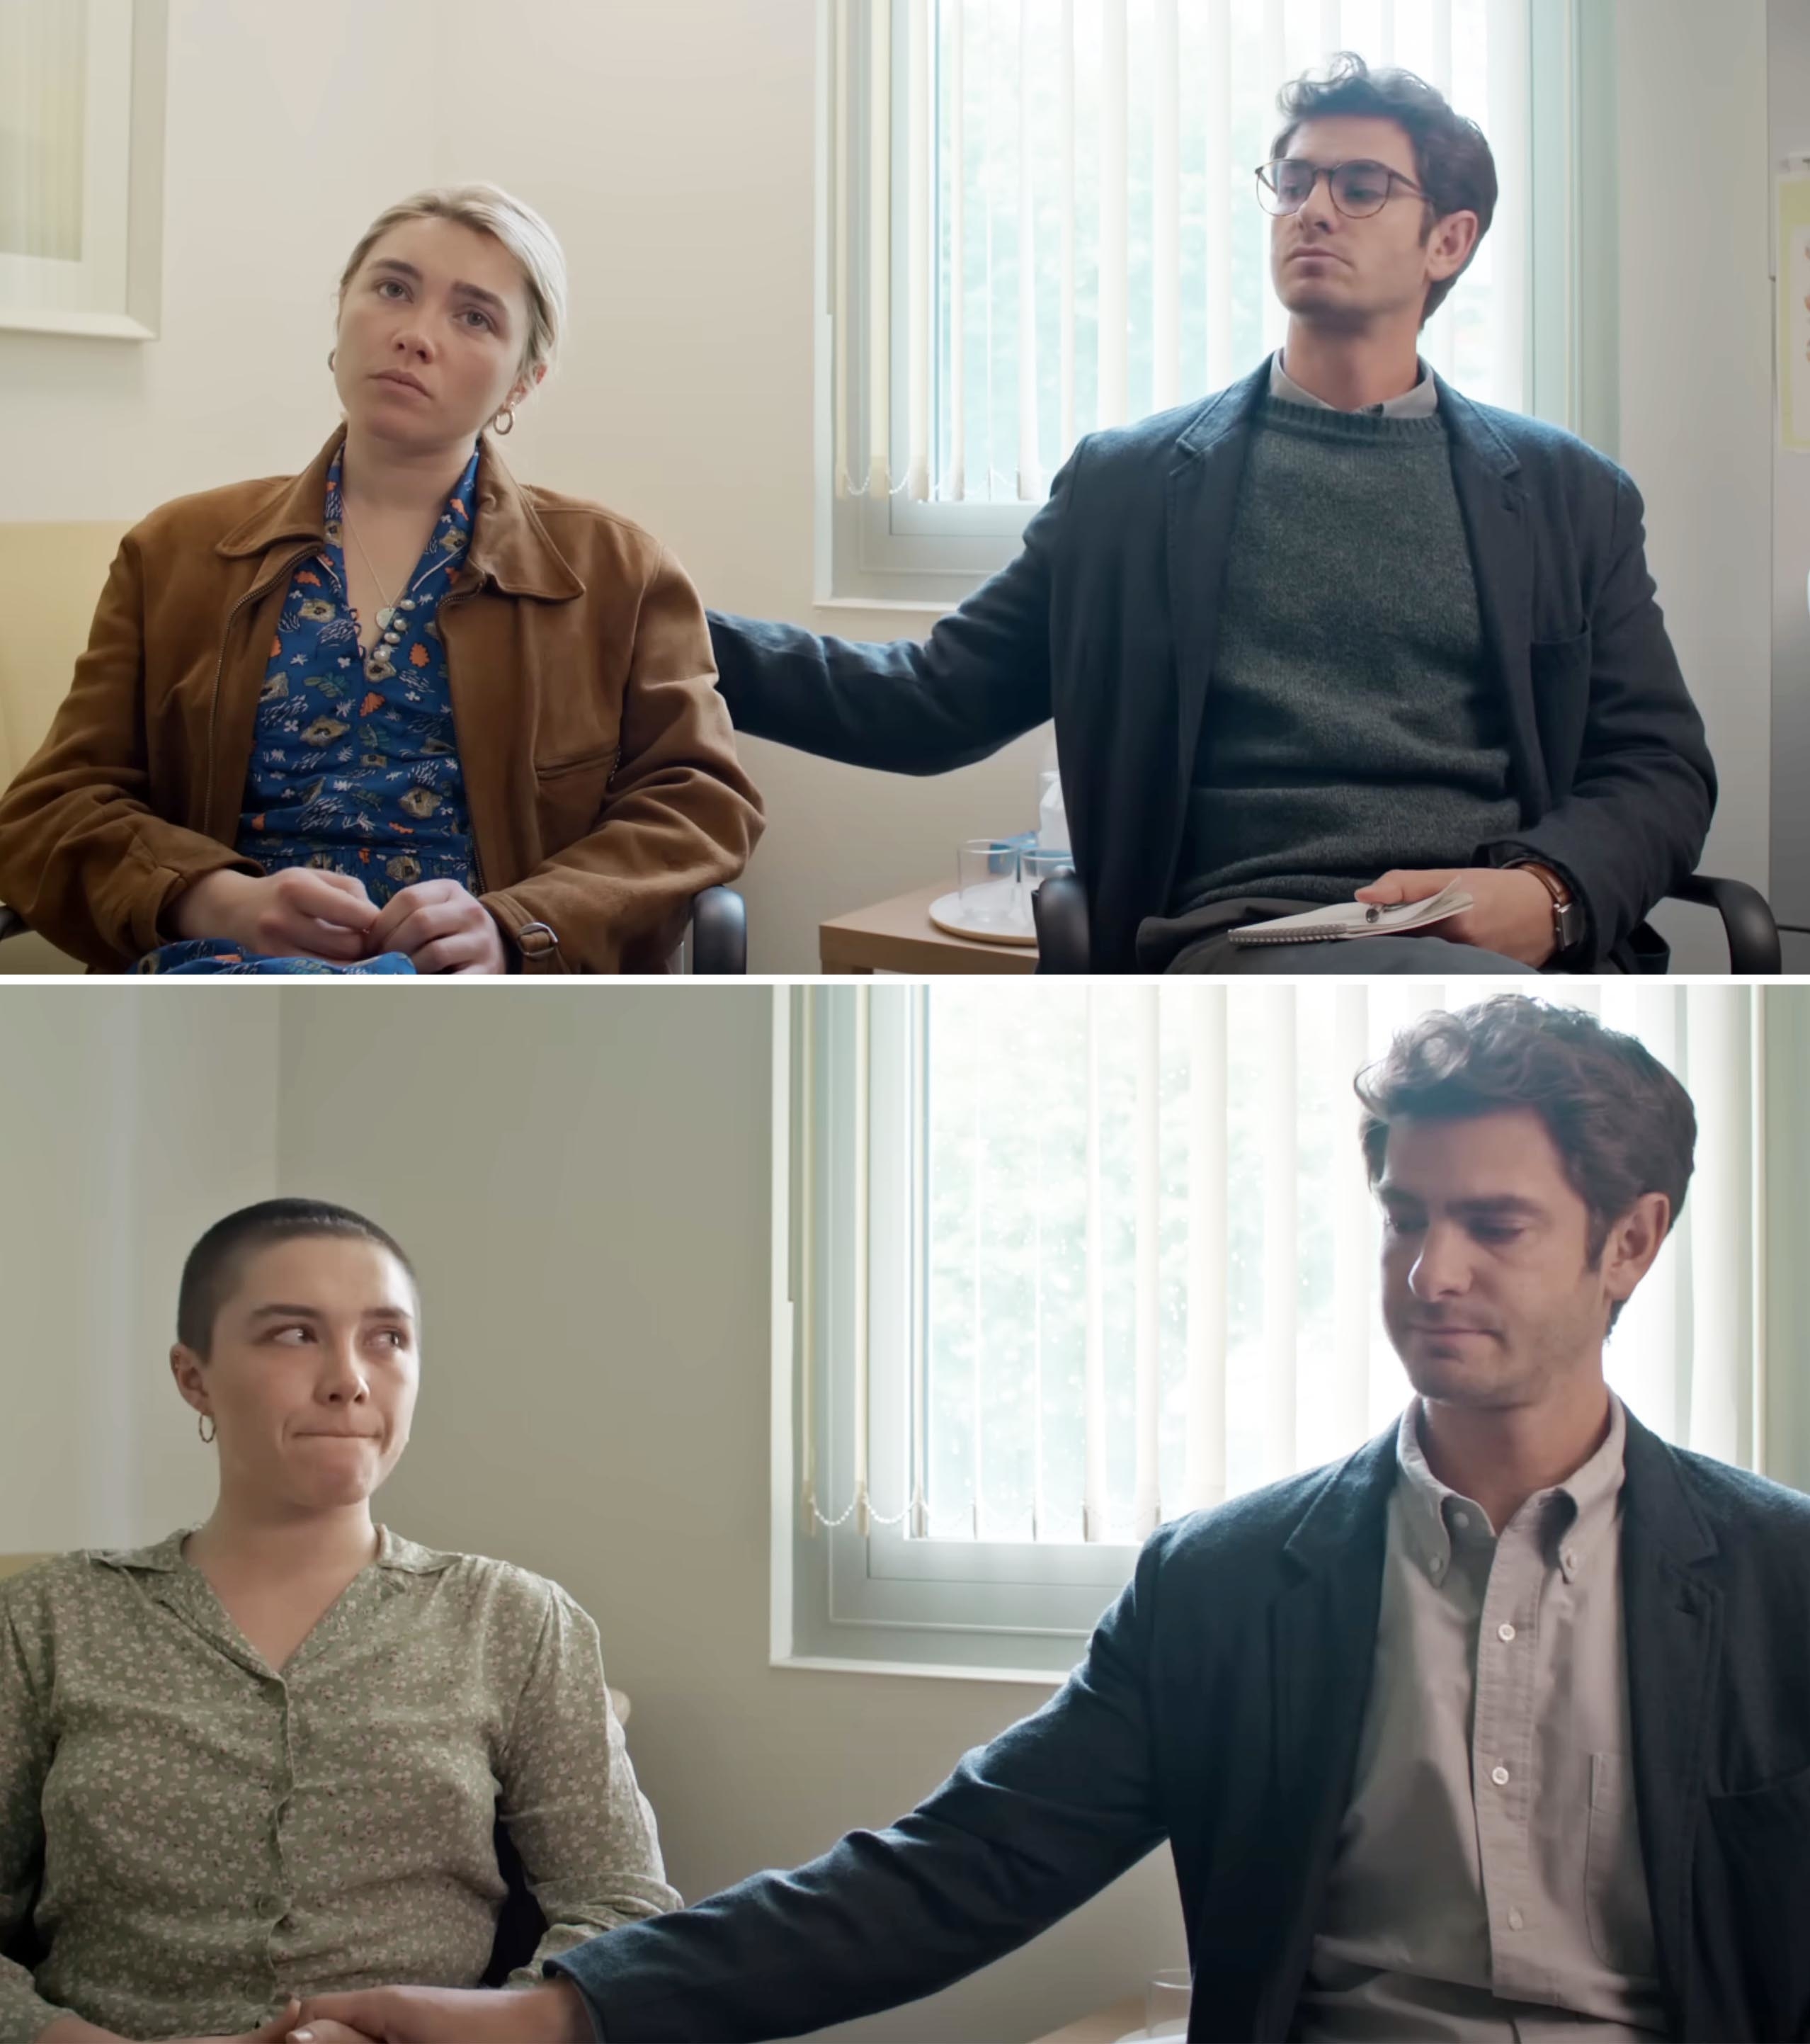 Florence Pugh and Andrew Garfield sit together in a therapist&#x27;s office in scenes from a TV show. Florence wears a long-sleeve shirt; Andrew is in a blazer